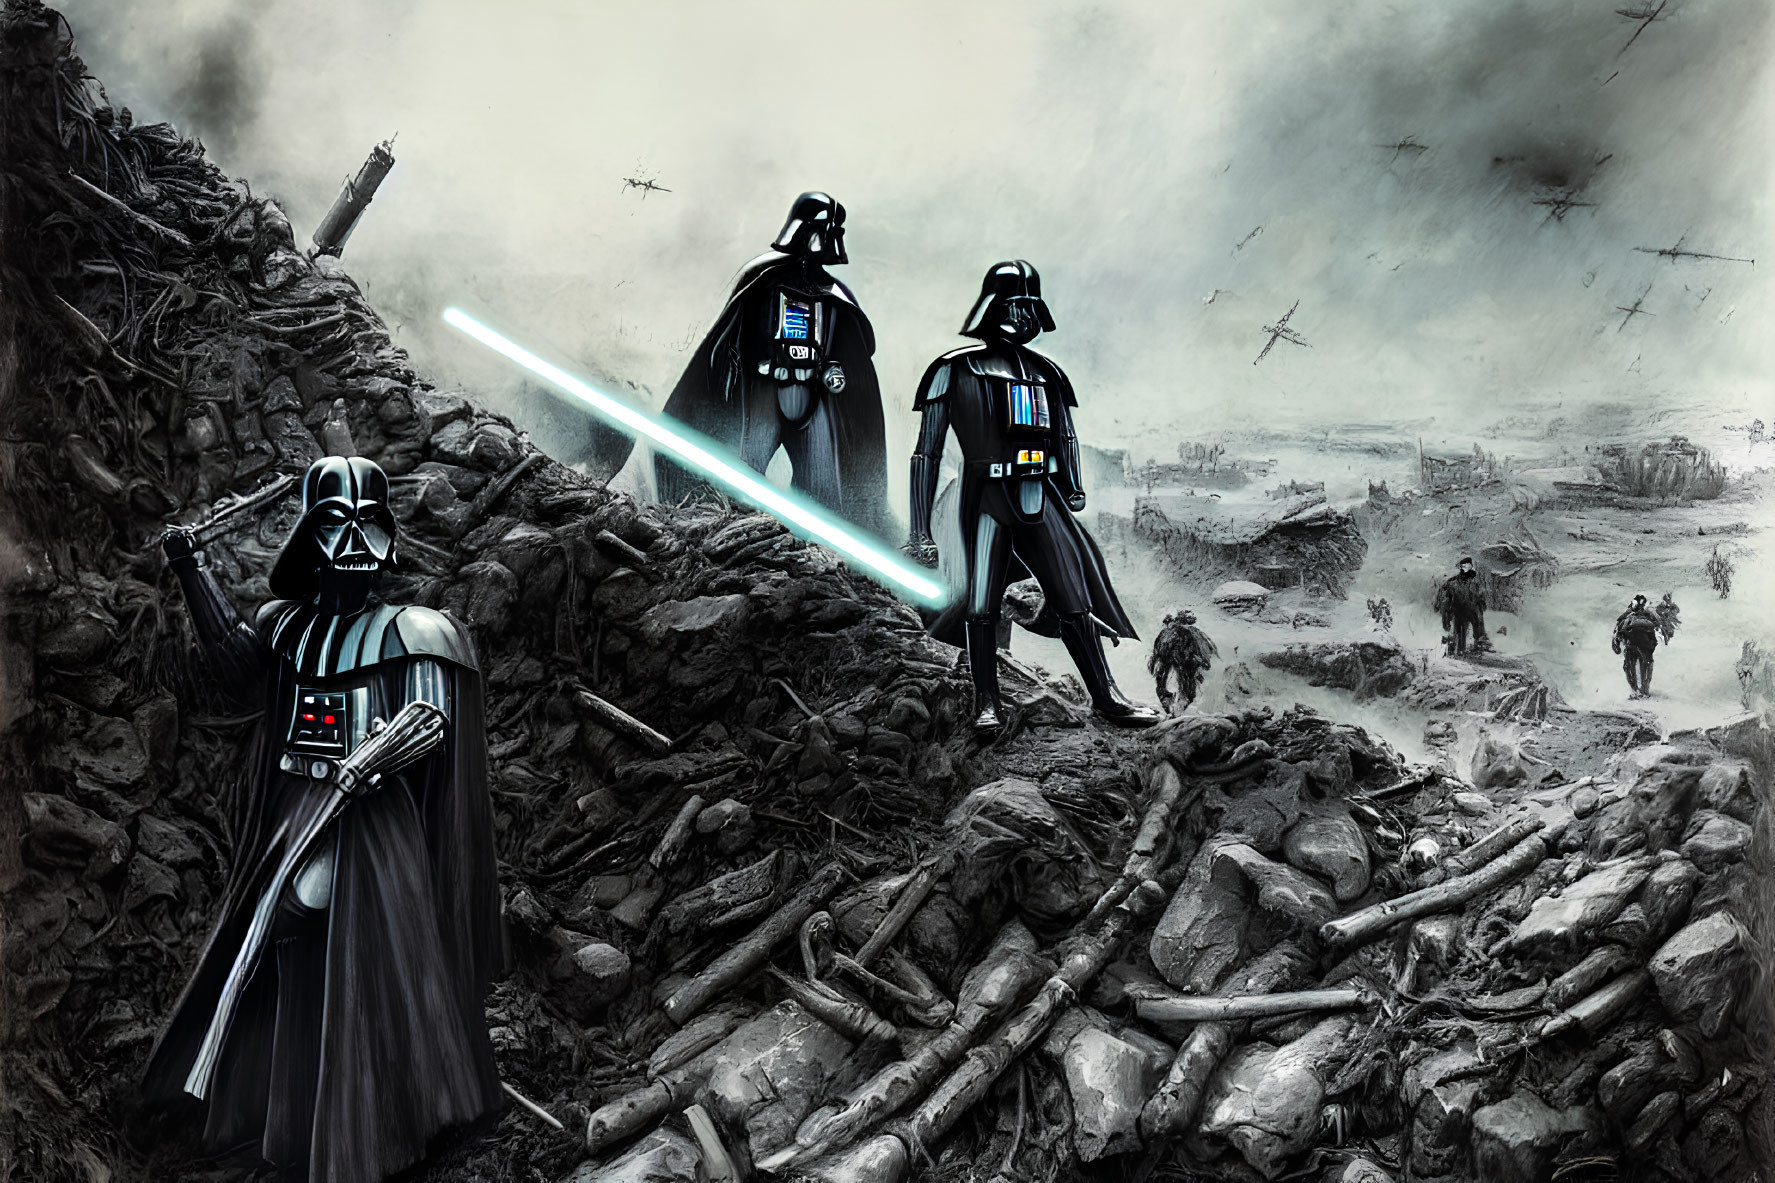 Three Darth Vader figures in battlefield scene with lightsaber and fallen soldiers.